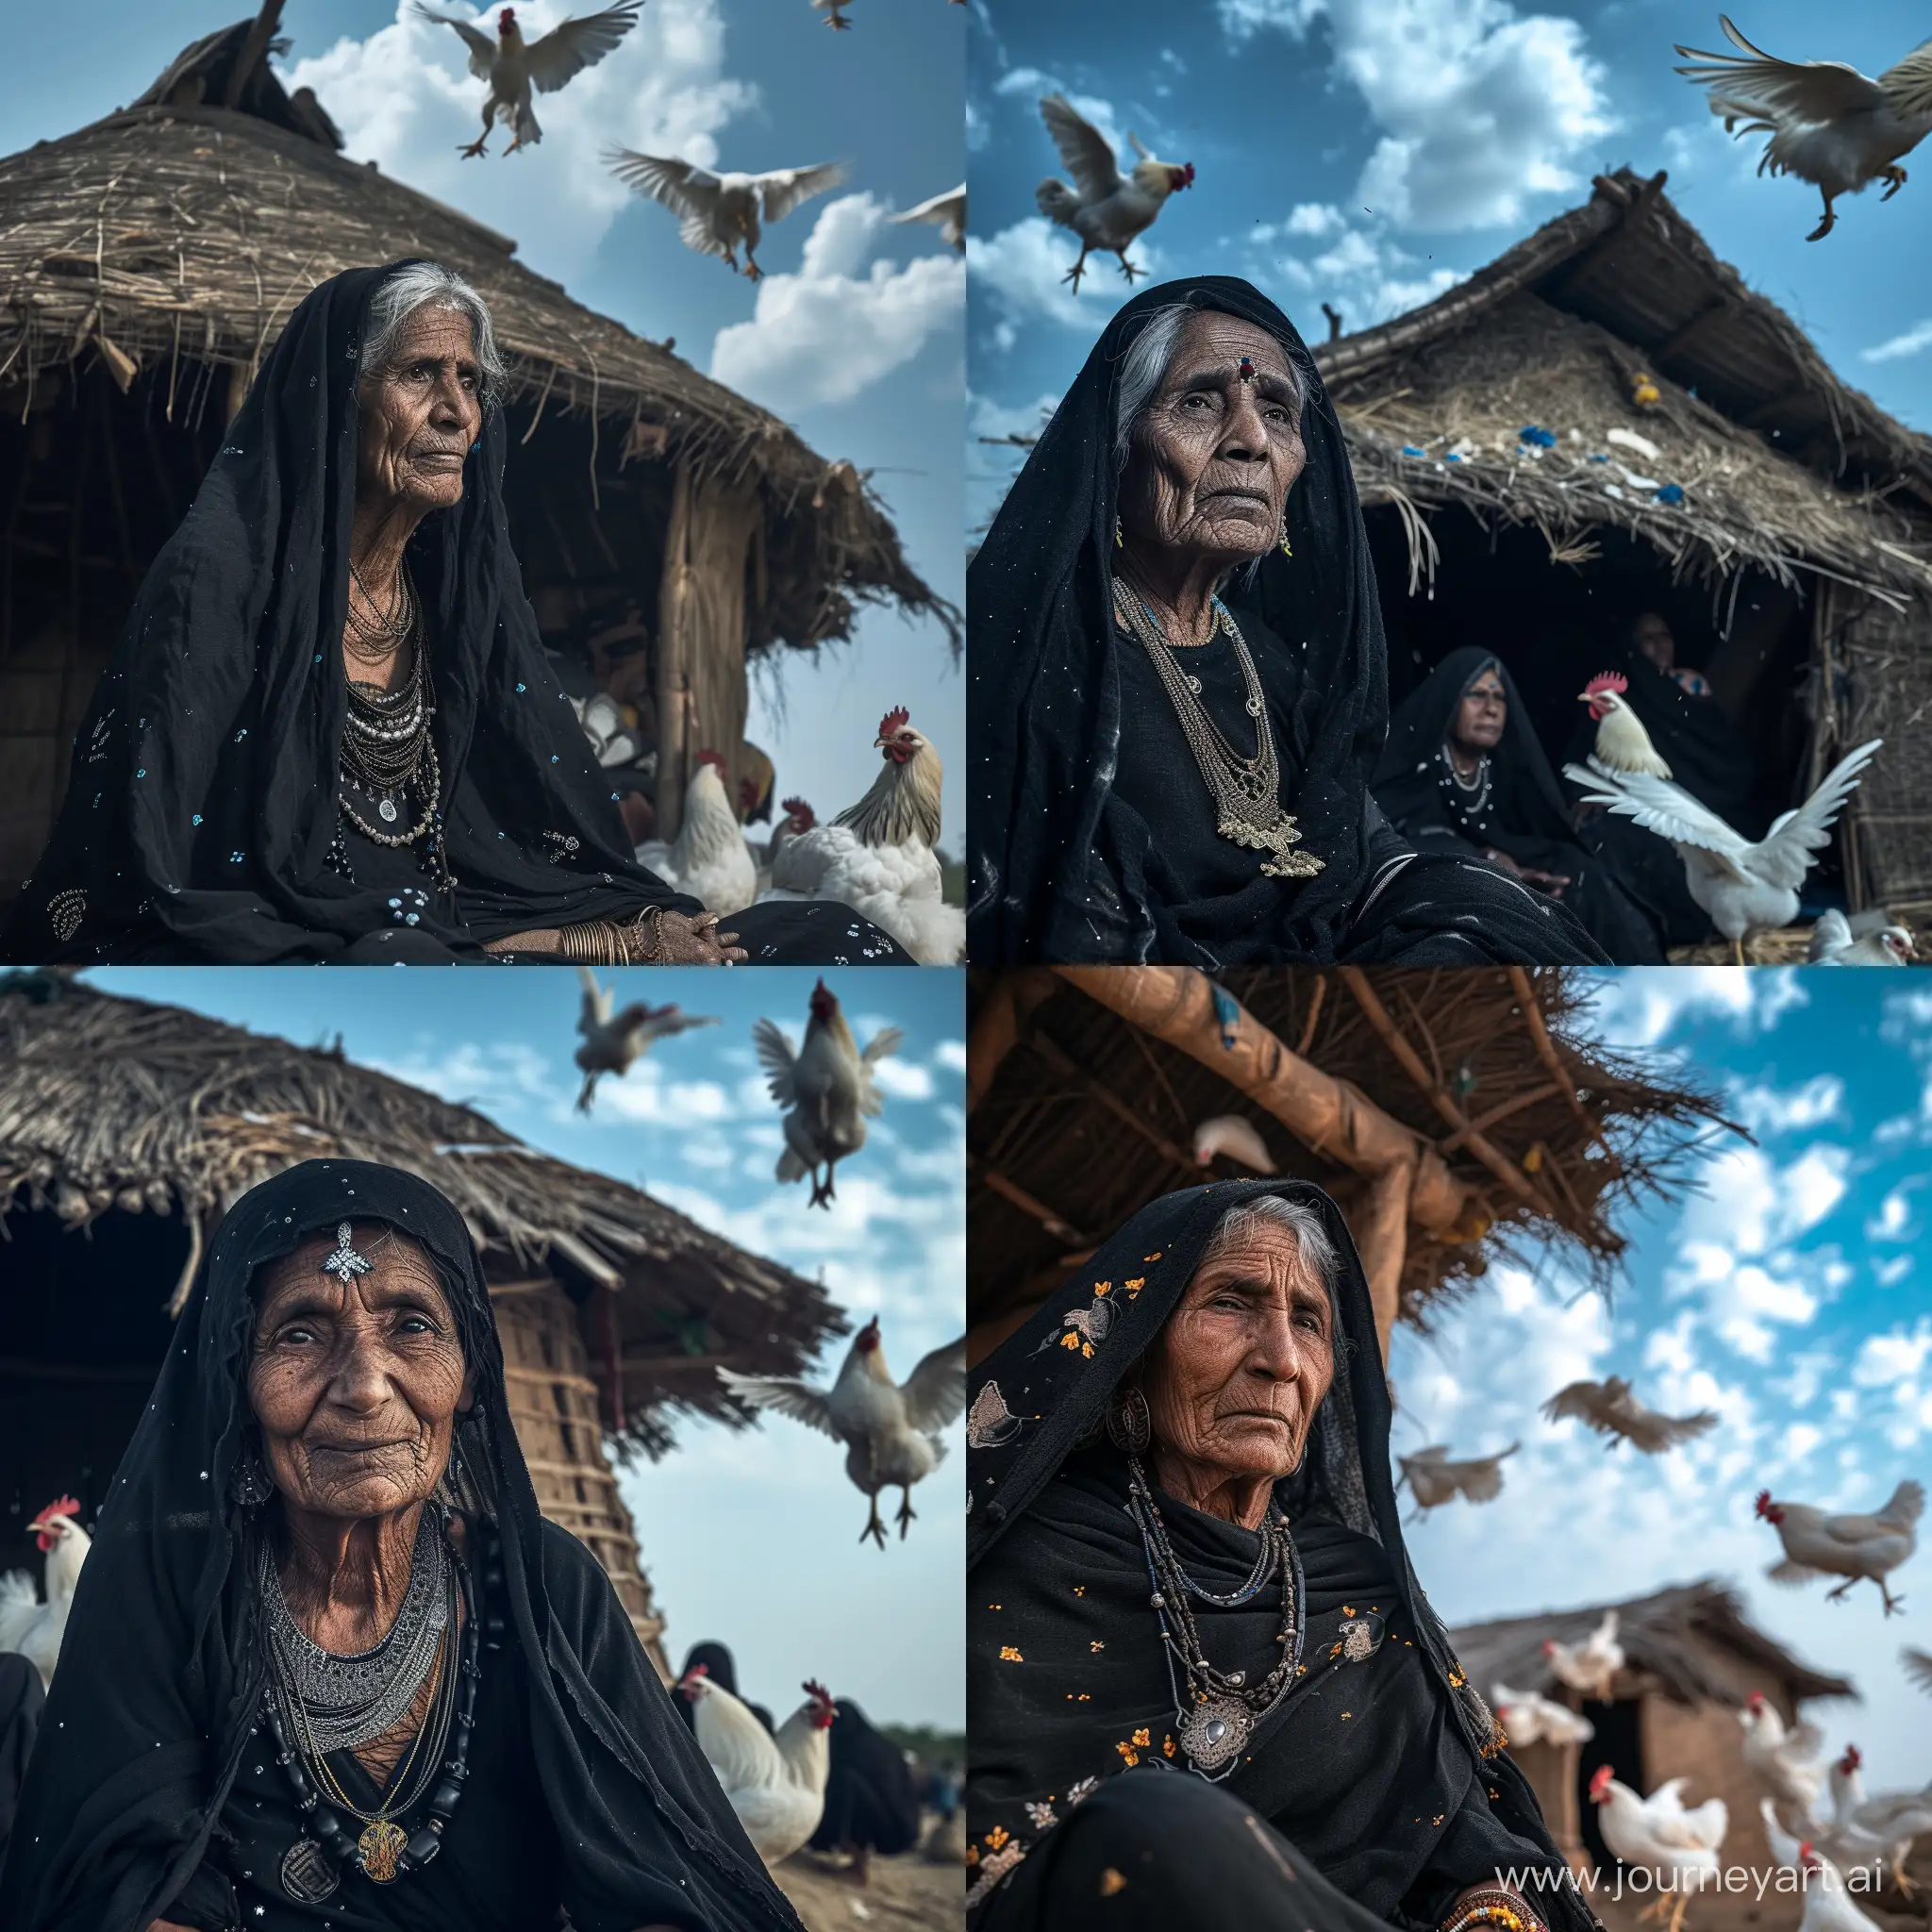 Traditional-Rabari-Women-Sitting-Before-a-Hut-with-Flying-Chickens-under-a-Blue-Sky